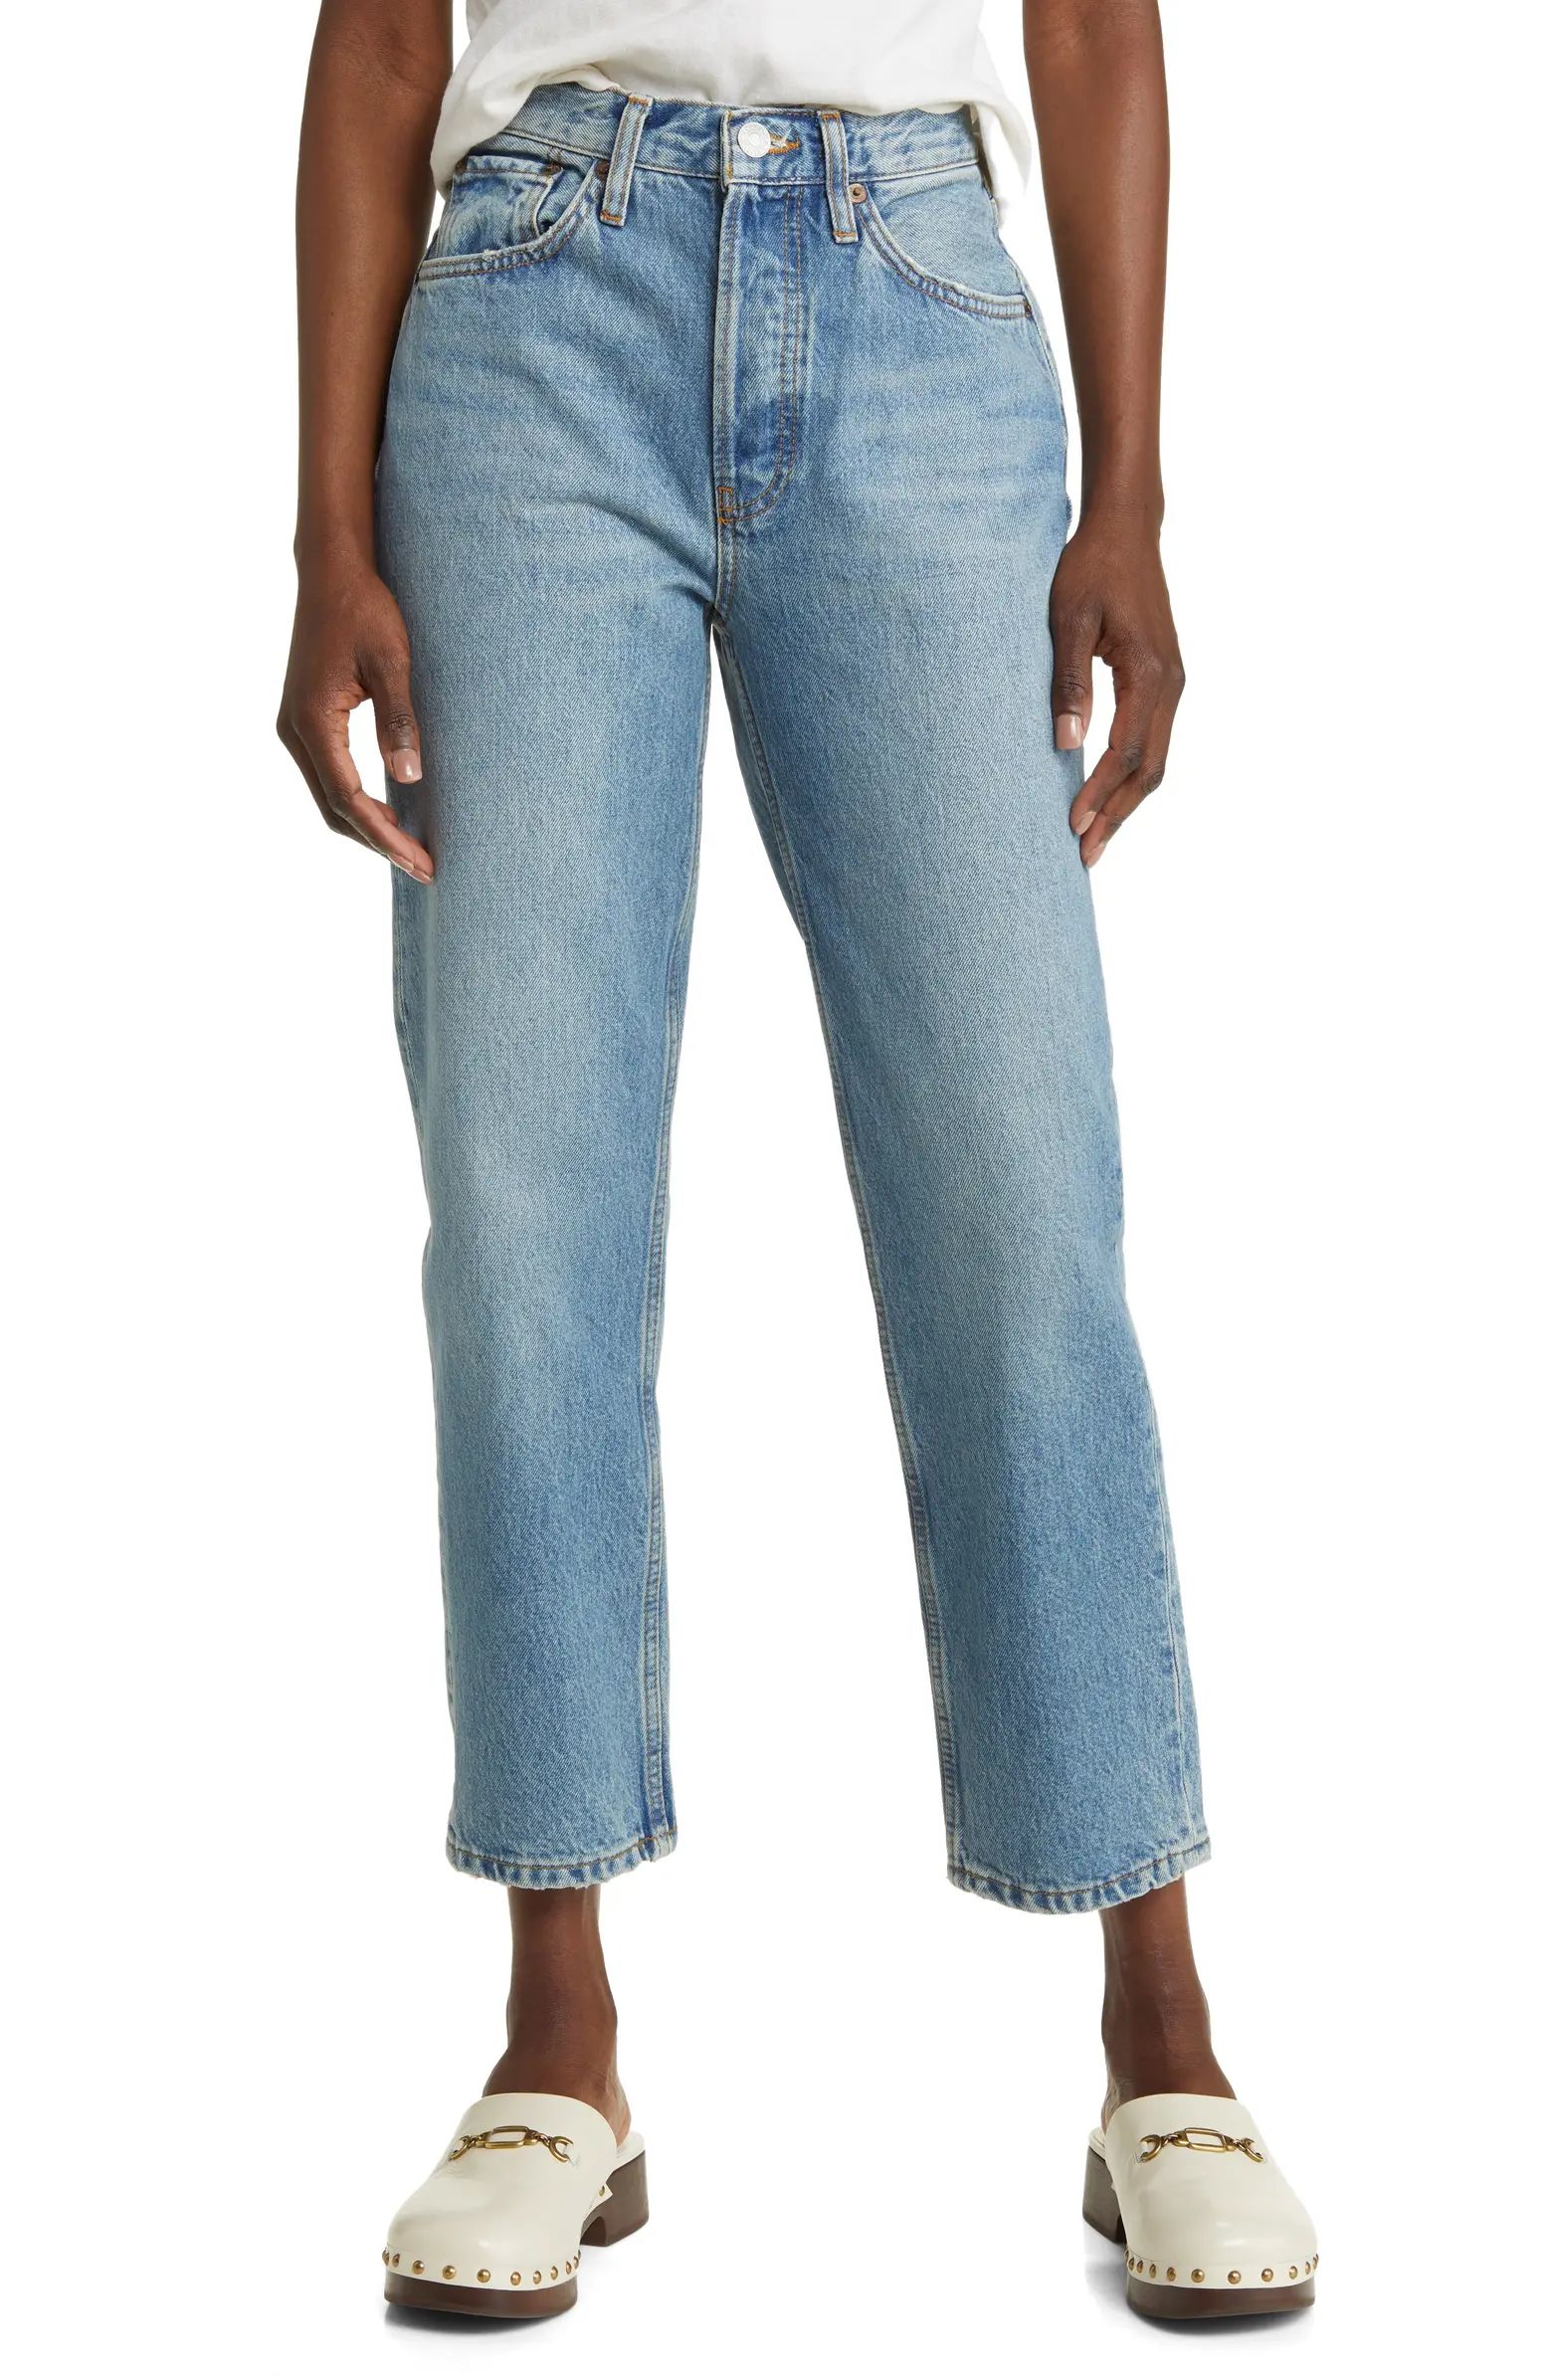 '70s Ultra High Waist Stove Pipe Jeans | Nordstrom